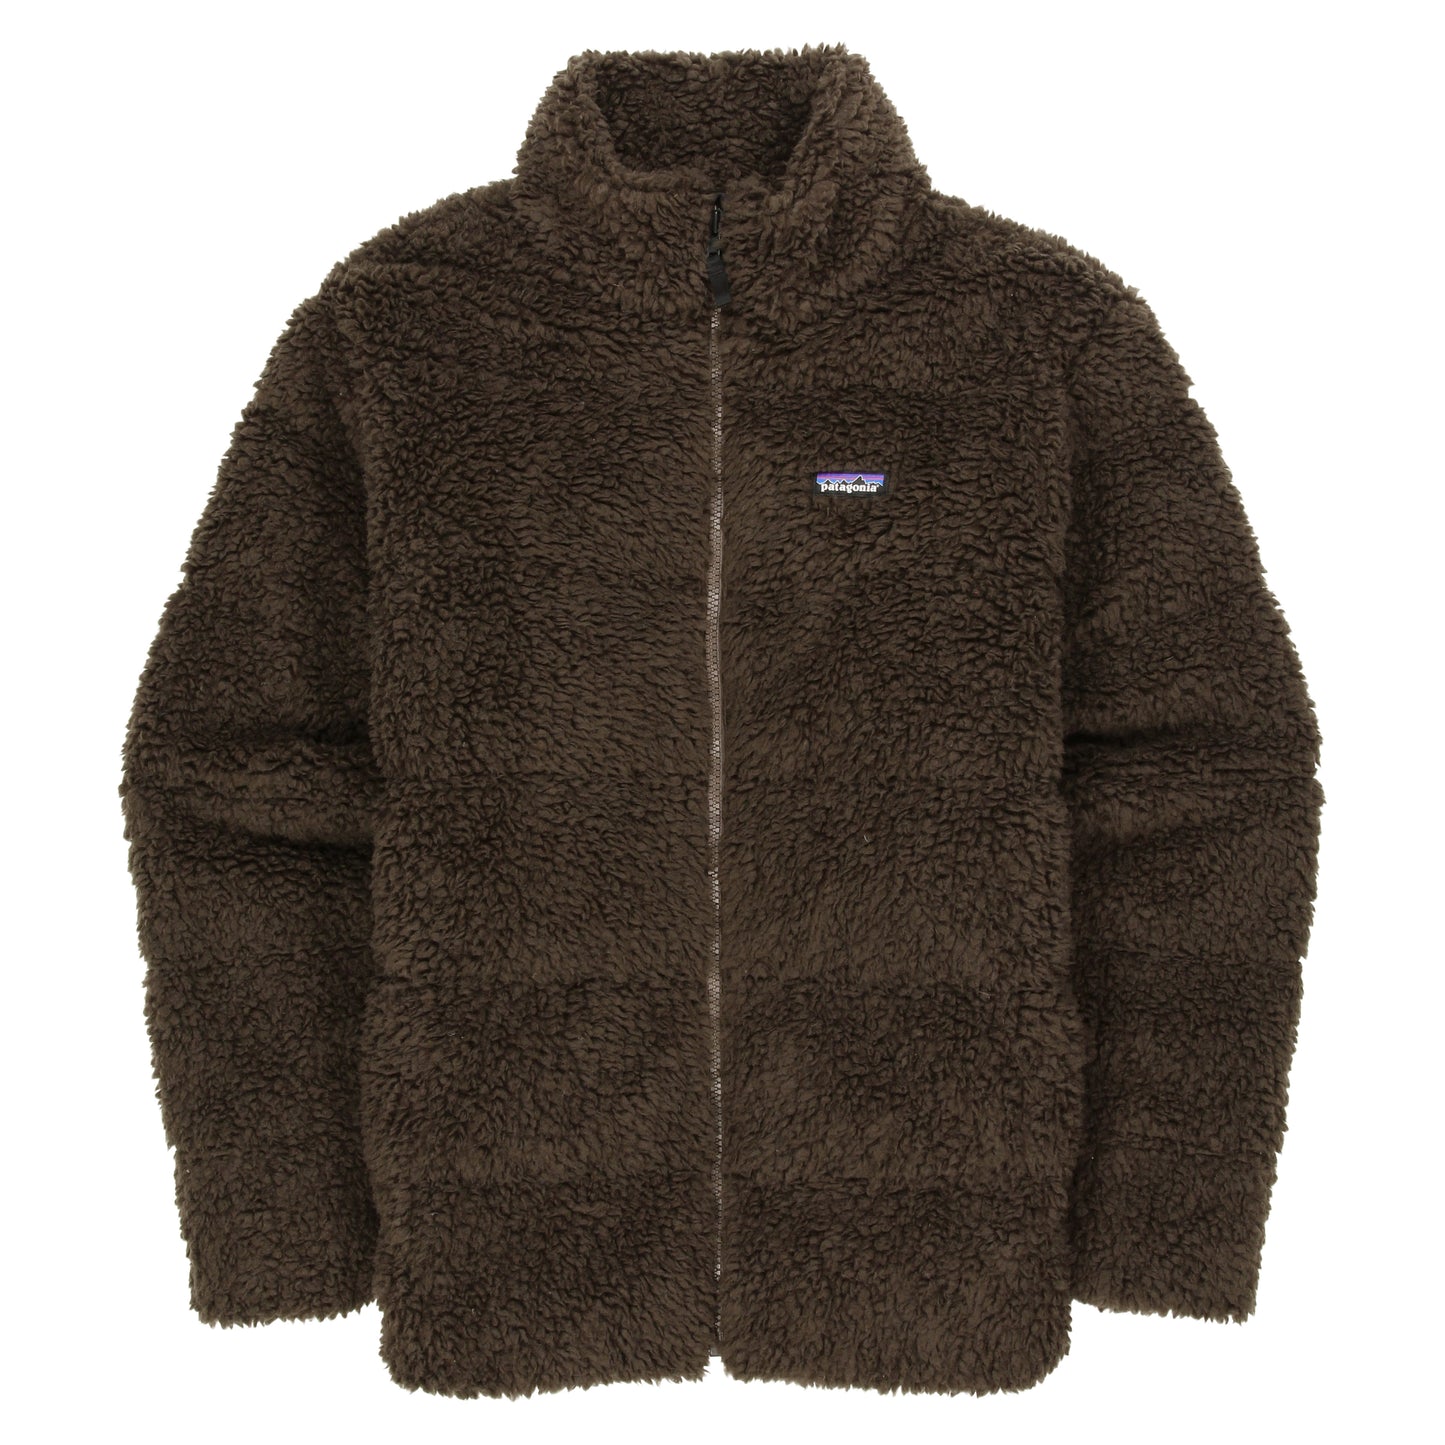 M's Recycled High Pile Fleece Down Jacket